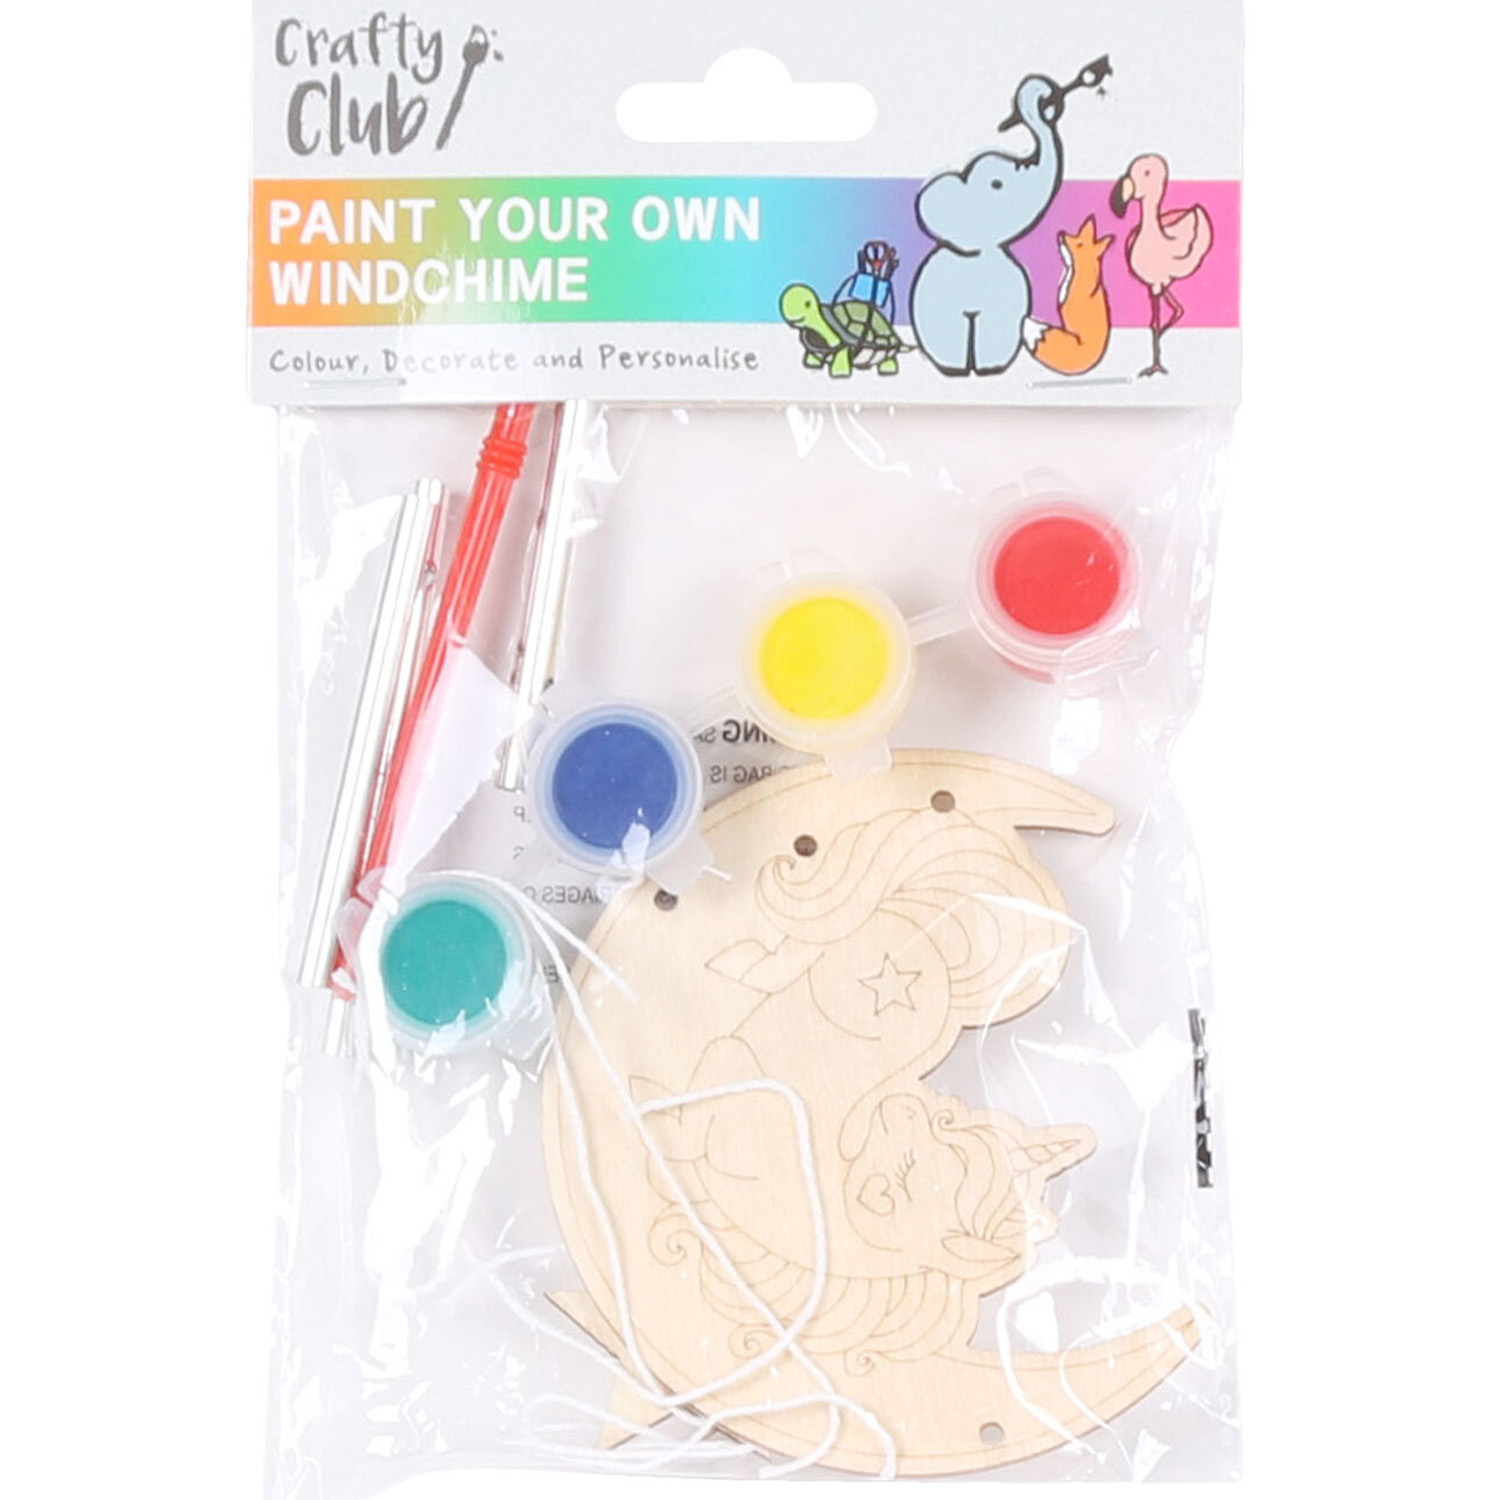 Single Crafty Club Paint Your Own Windchime Kit in Assorted styles Image 3